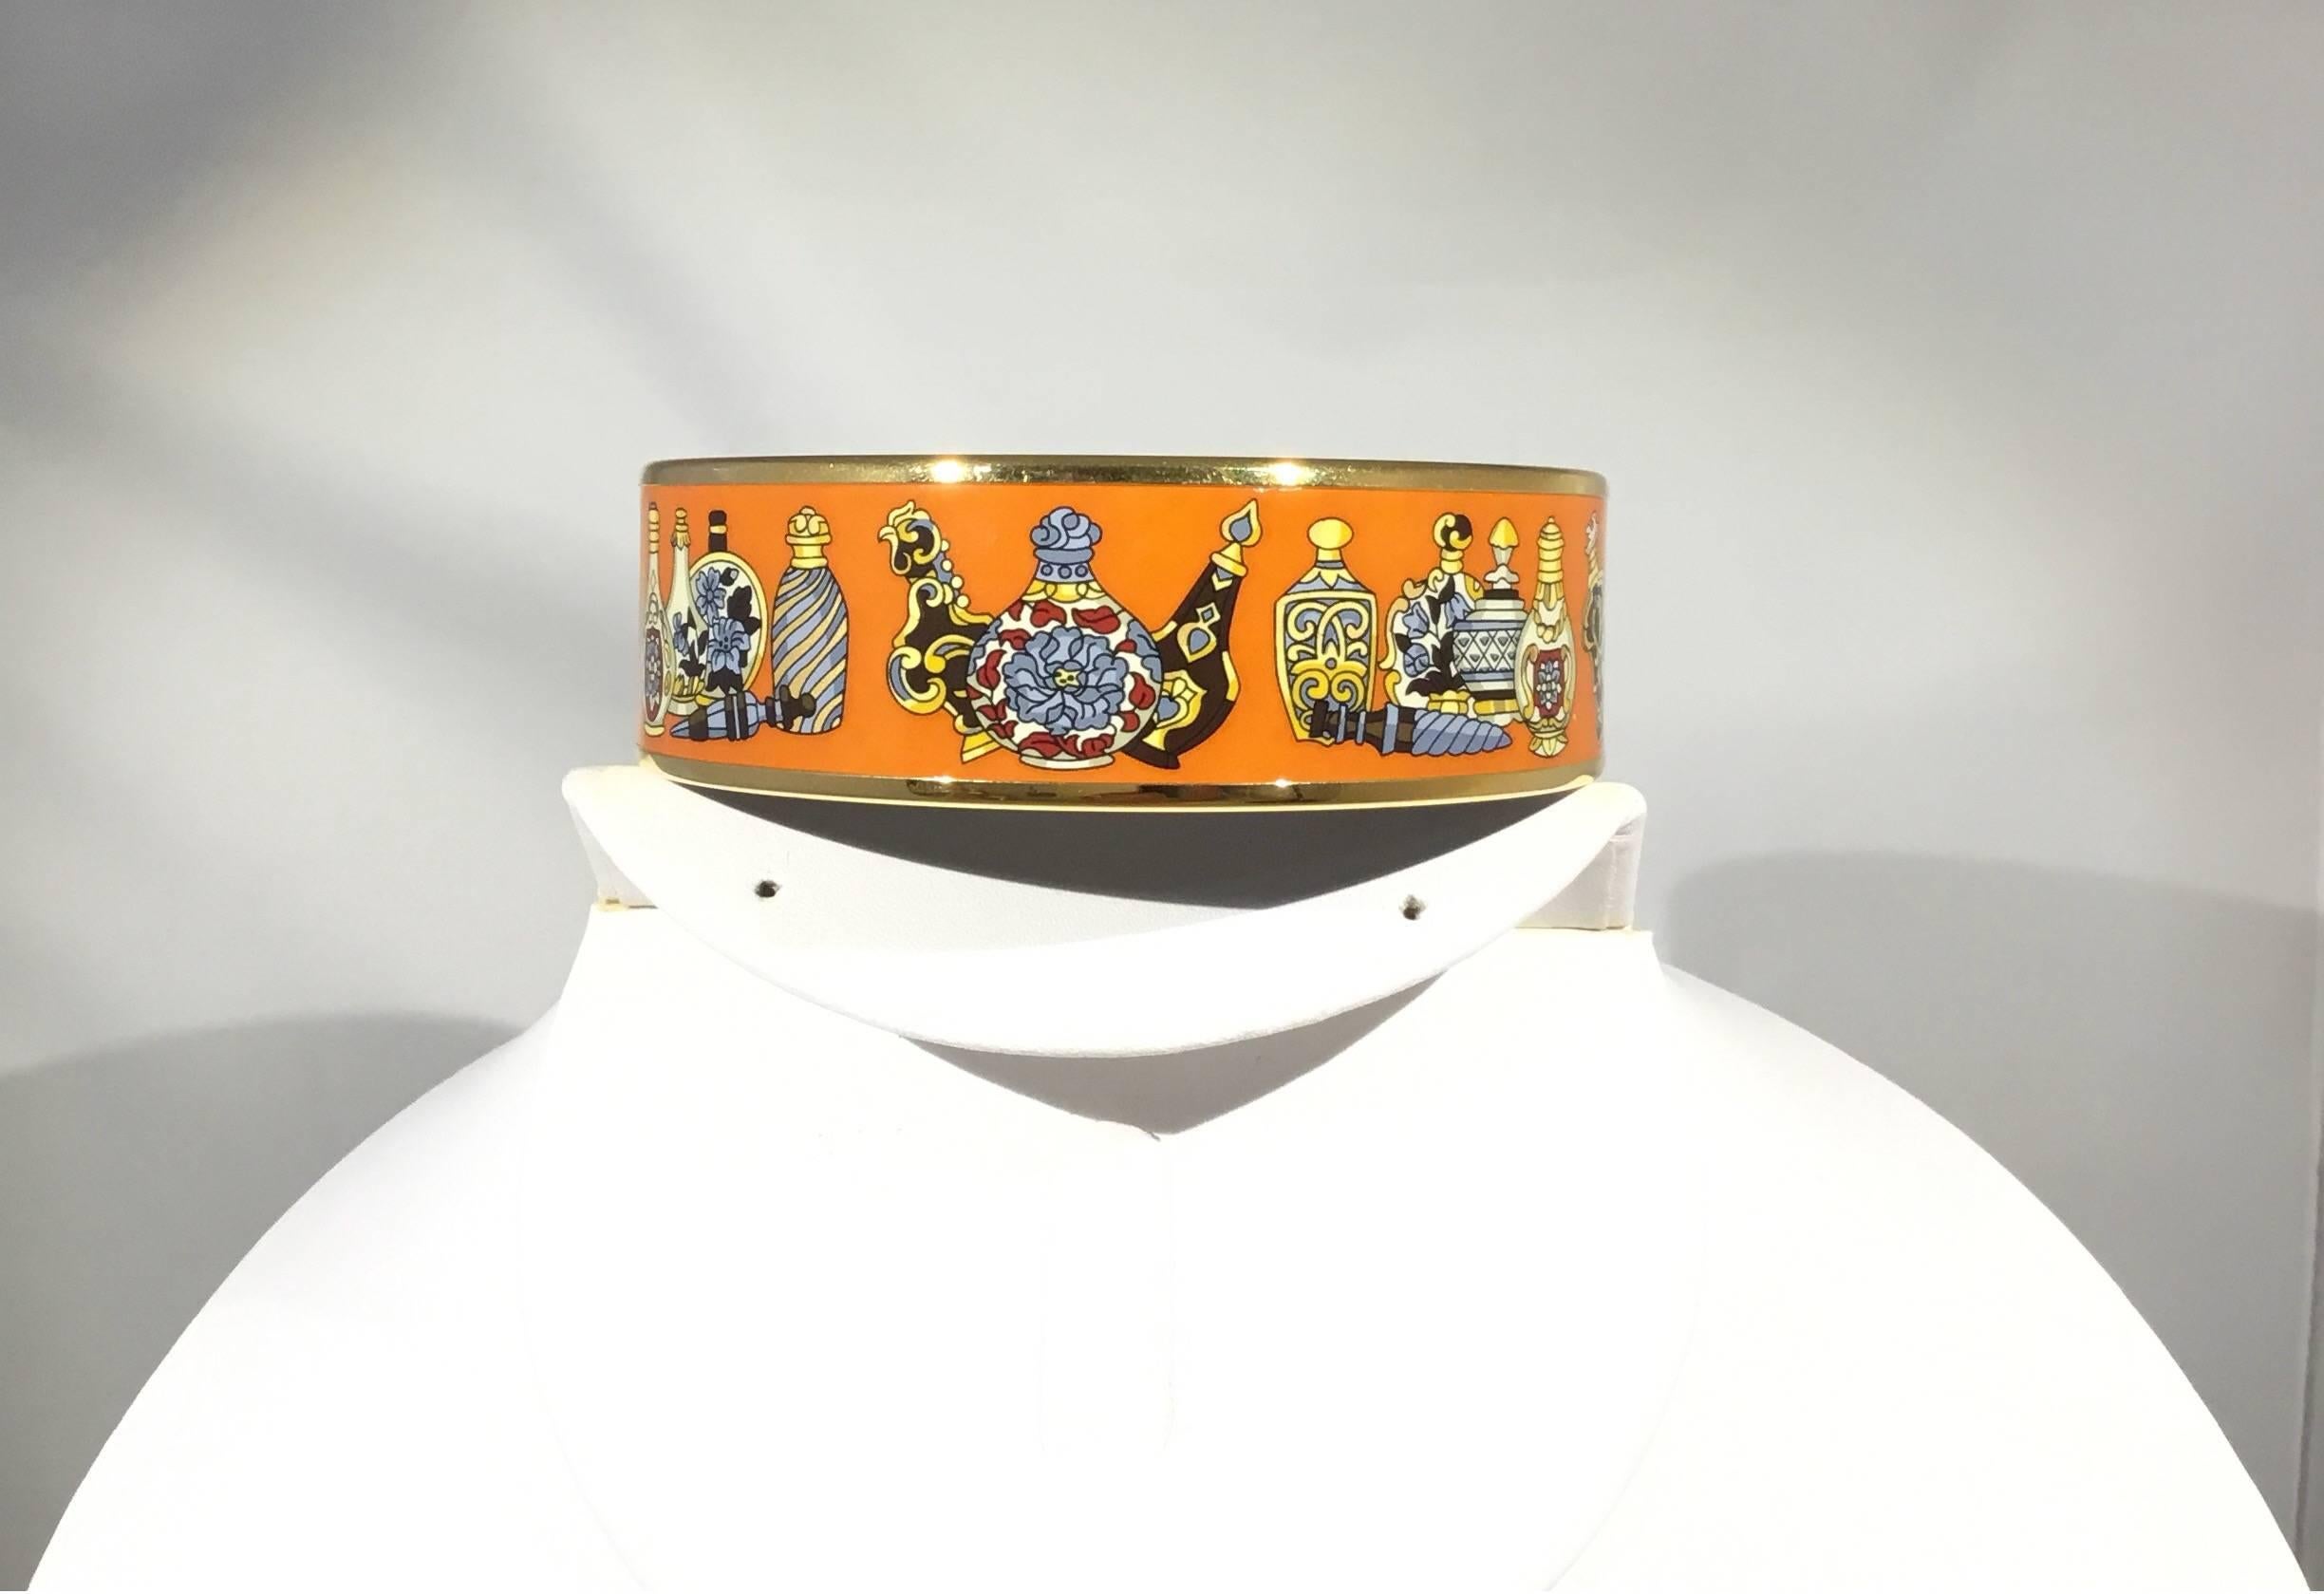 Hermes enamel bangle featured in an orange and multicolor Print with gold tone hardware. Made in Autstria + K.  Bangle includes box and dust bag.

Diameter 2.75” (6.98 cm), width 0.75”